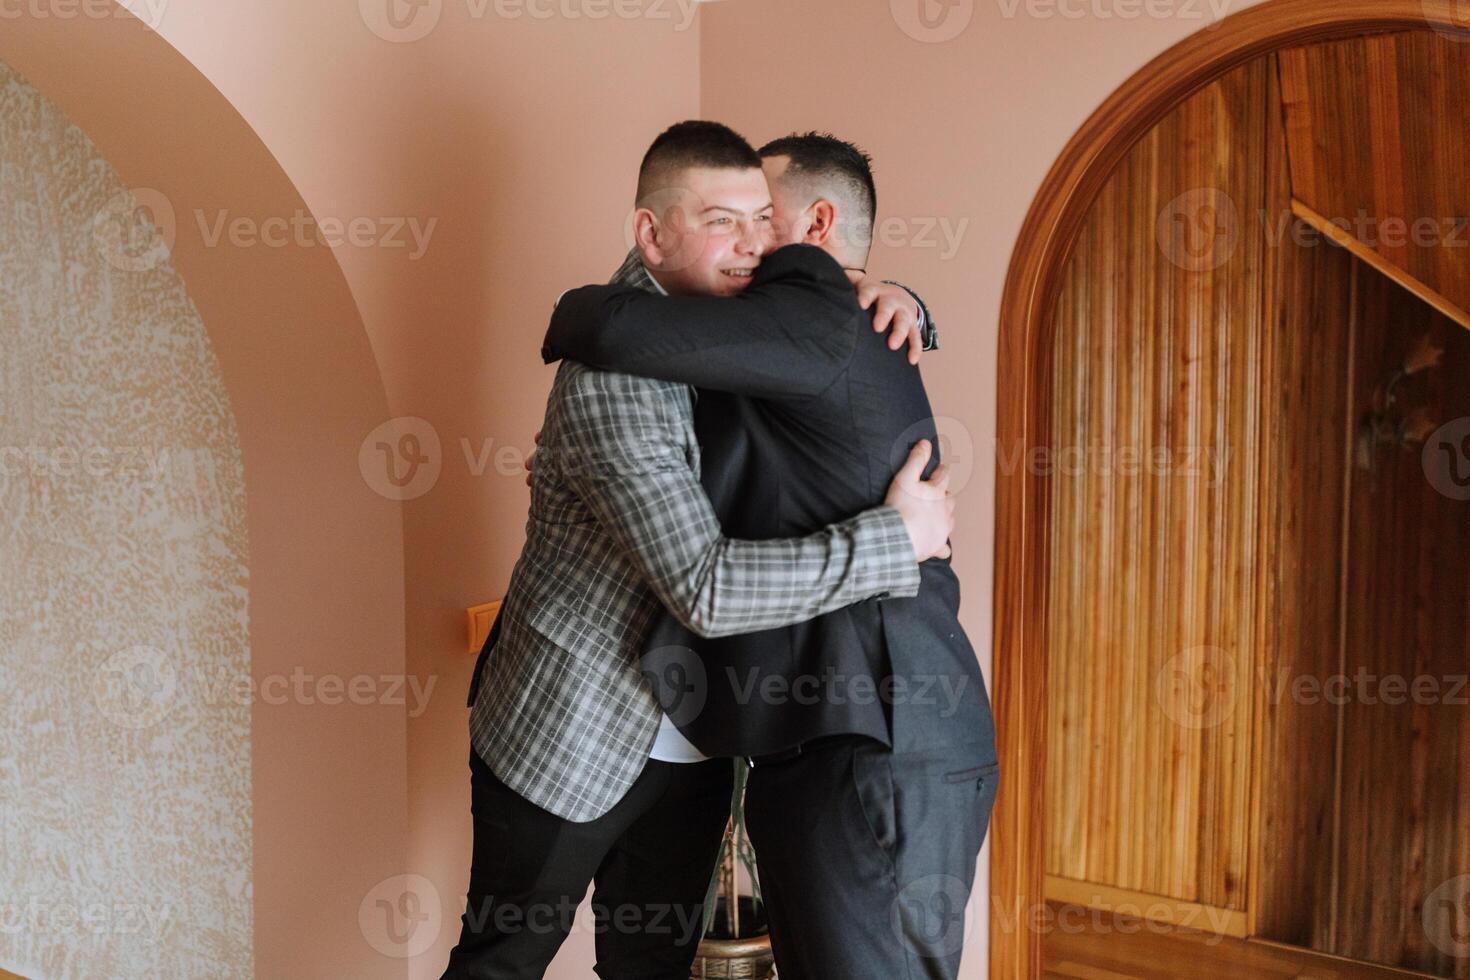 The brother supports the brother-groom and helps him prepare for the wedding ceremony. Warm and sincere relations between brothers. An emotional moment at a wedding photo